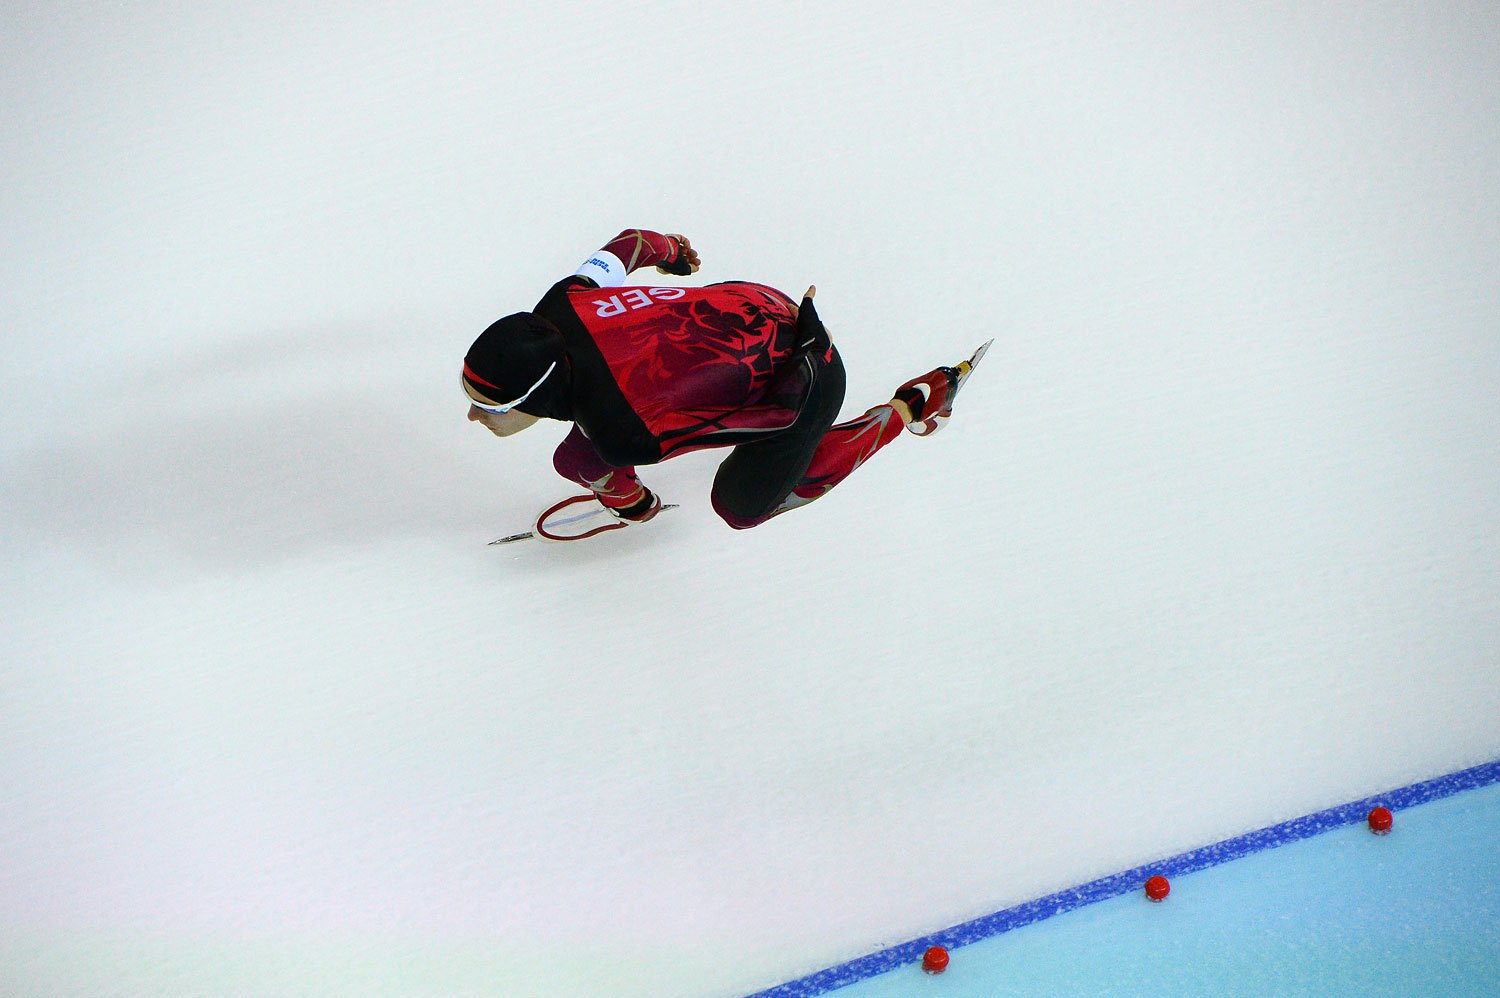 Germany's Patrick Beckert competes in the Men's Speed Skating 5000m at the Adler Arena on Feb. 8, 2014.